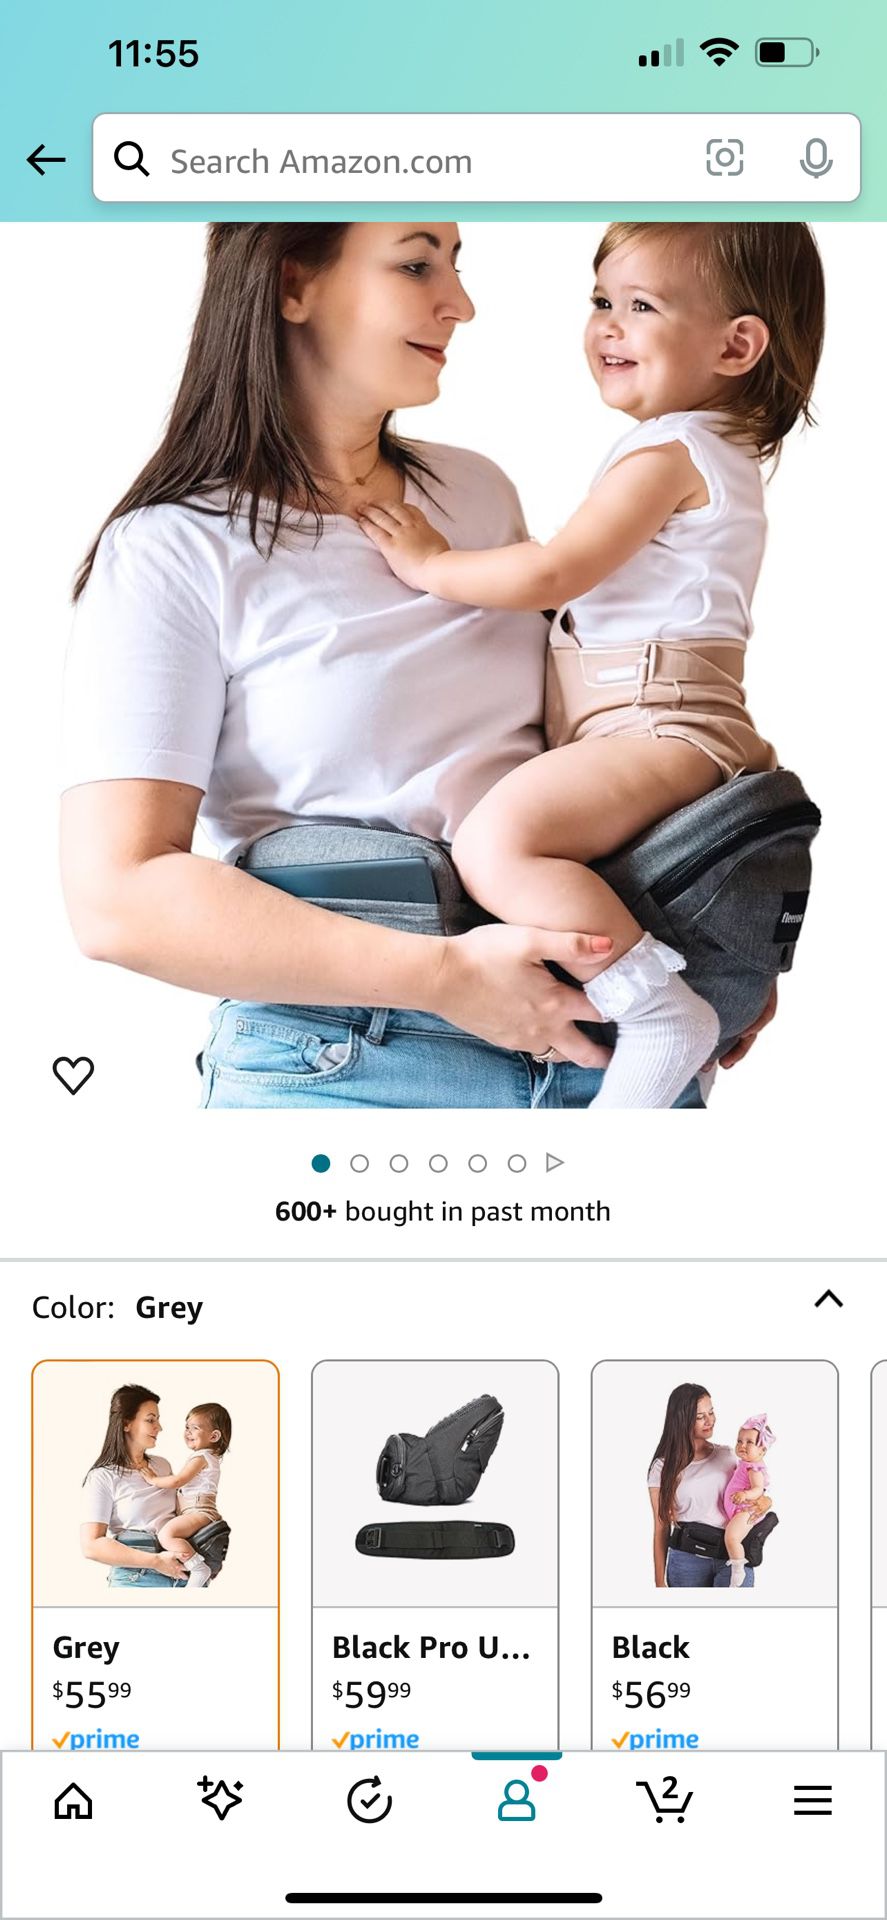 Hipseat Carrier Baby